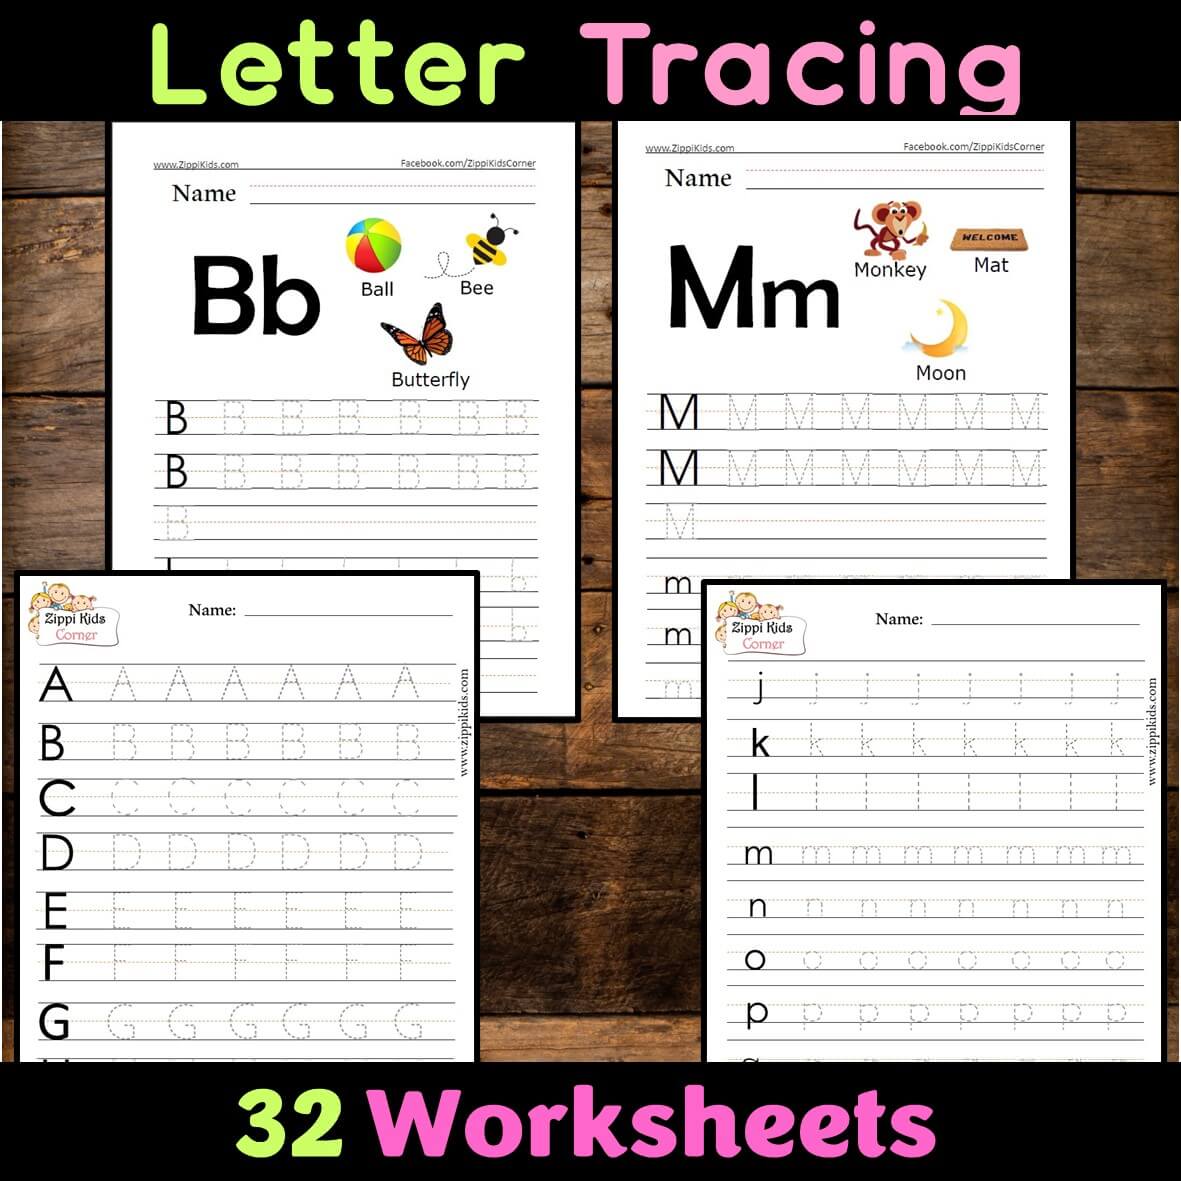 ABC's Tracing Worksheets Bundle, Letter Tracing Worksheets